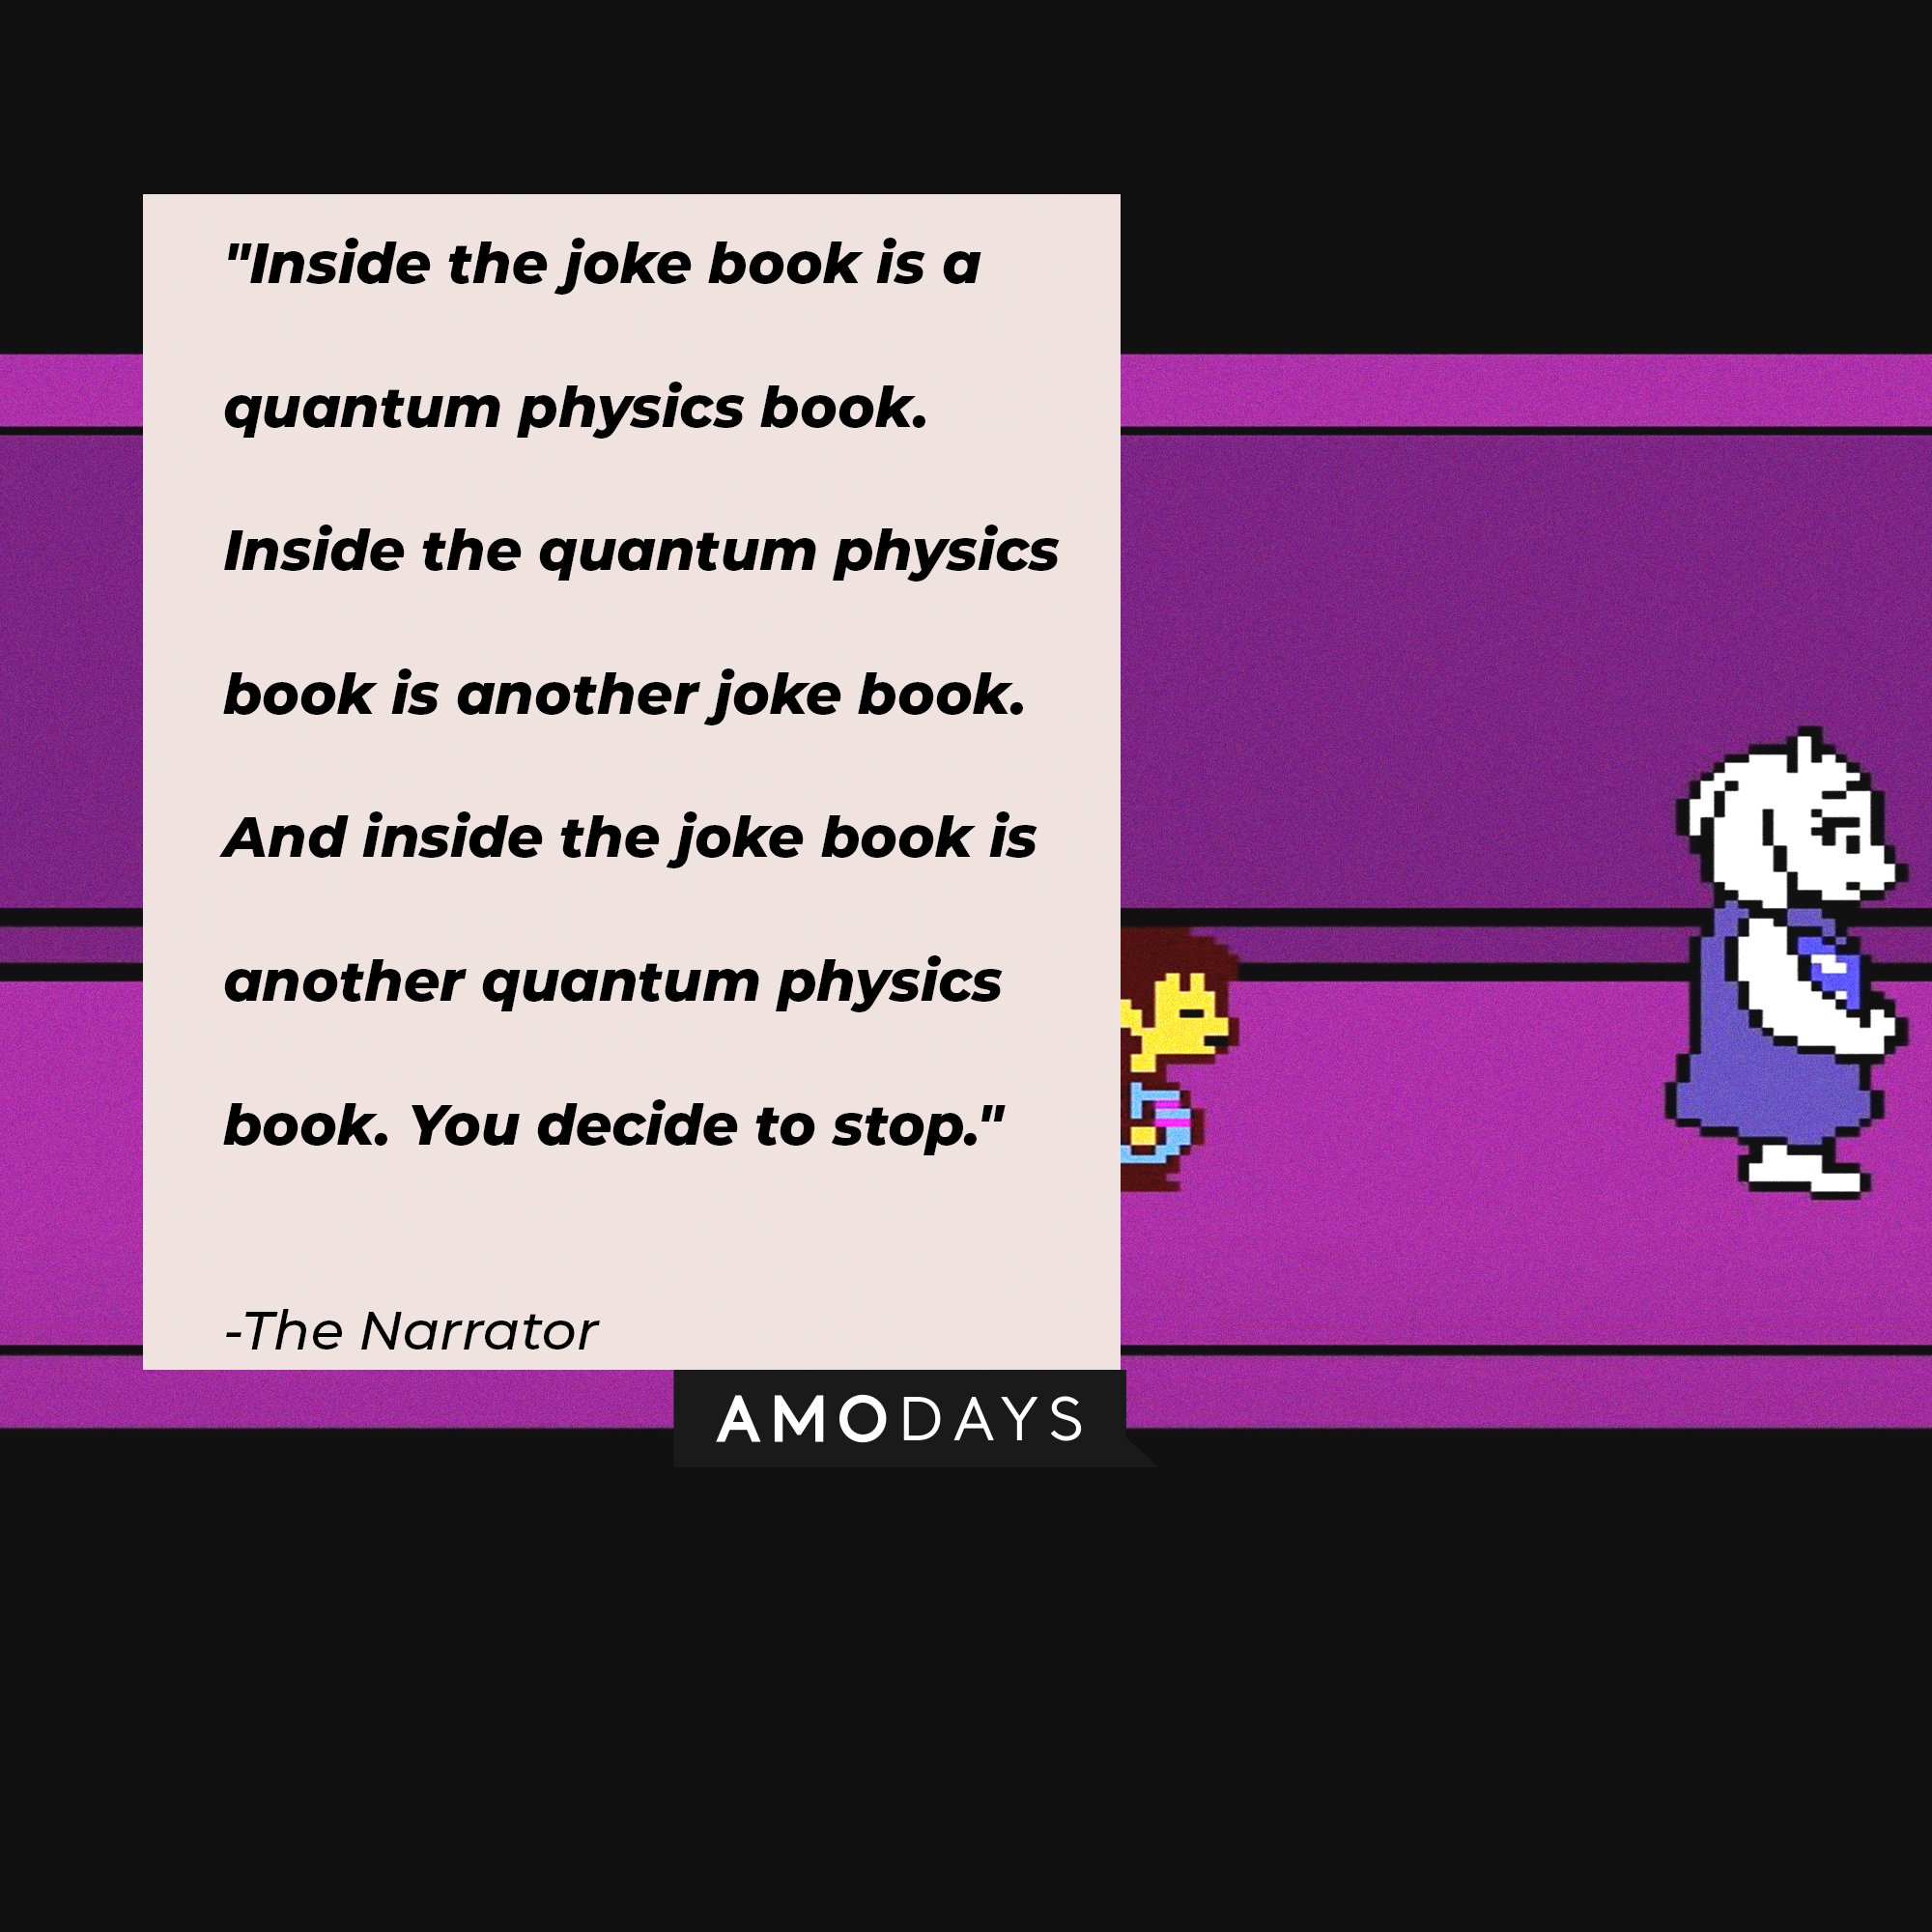 The Narrator’s quote: "Inside the joke book is a quantum physics book. Inside the quantum physics book is another joke book. And inside the joke book is another quantum physics book. You decide to stop." | Image: AmoDays